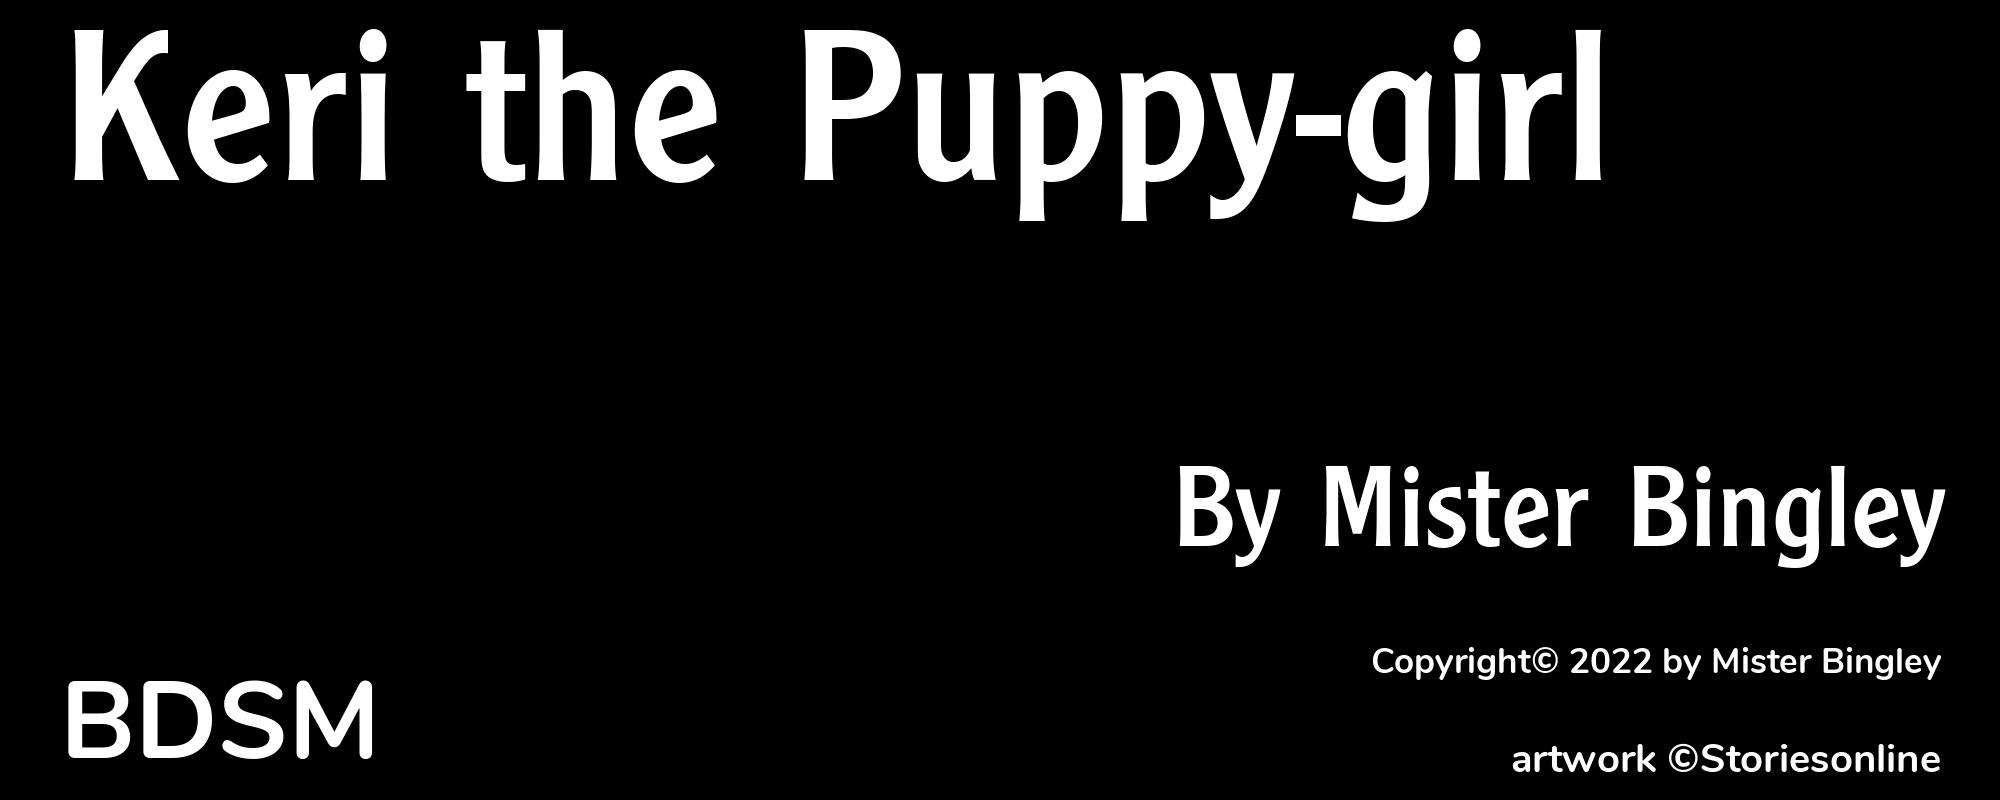 Keri the Puppy-girl - Cover